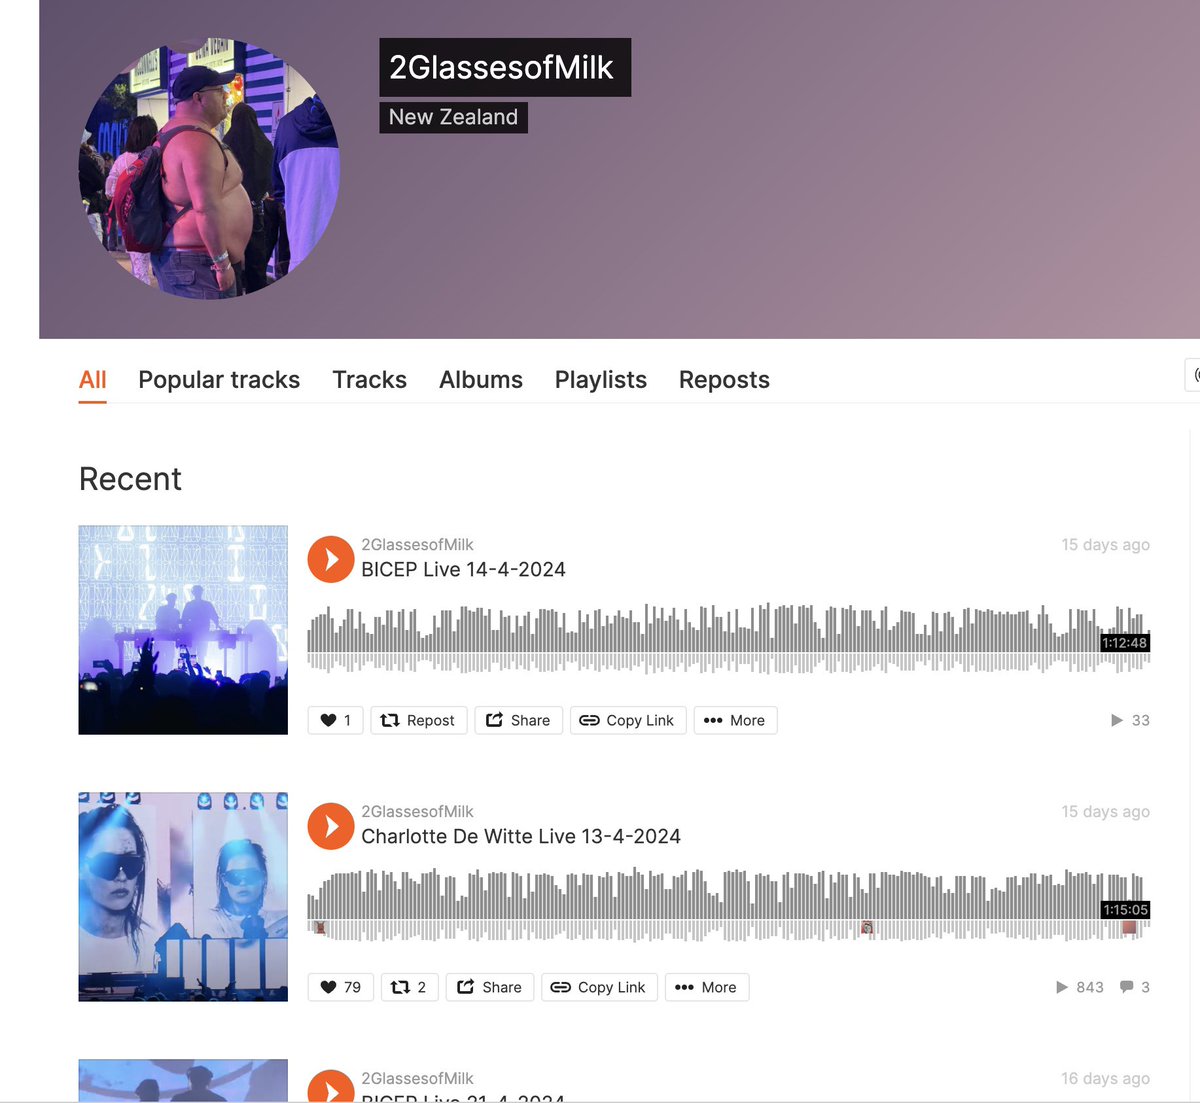 Bruh who tf SoundCloud account is this 😂😂😂 posting ripped sets with the random fake Snax Styler pic from Coachella